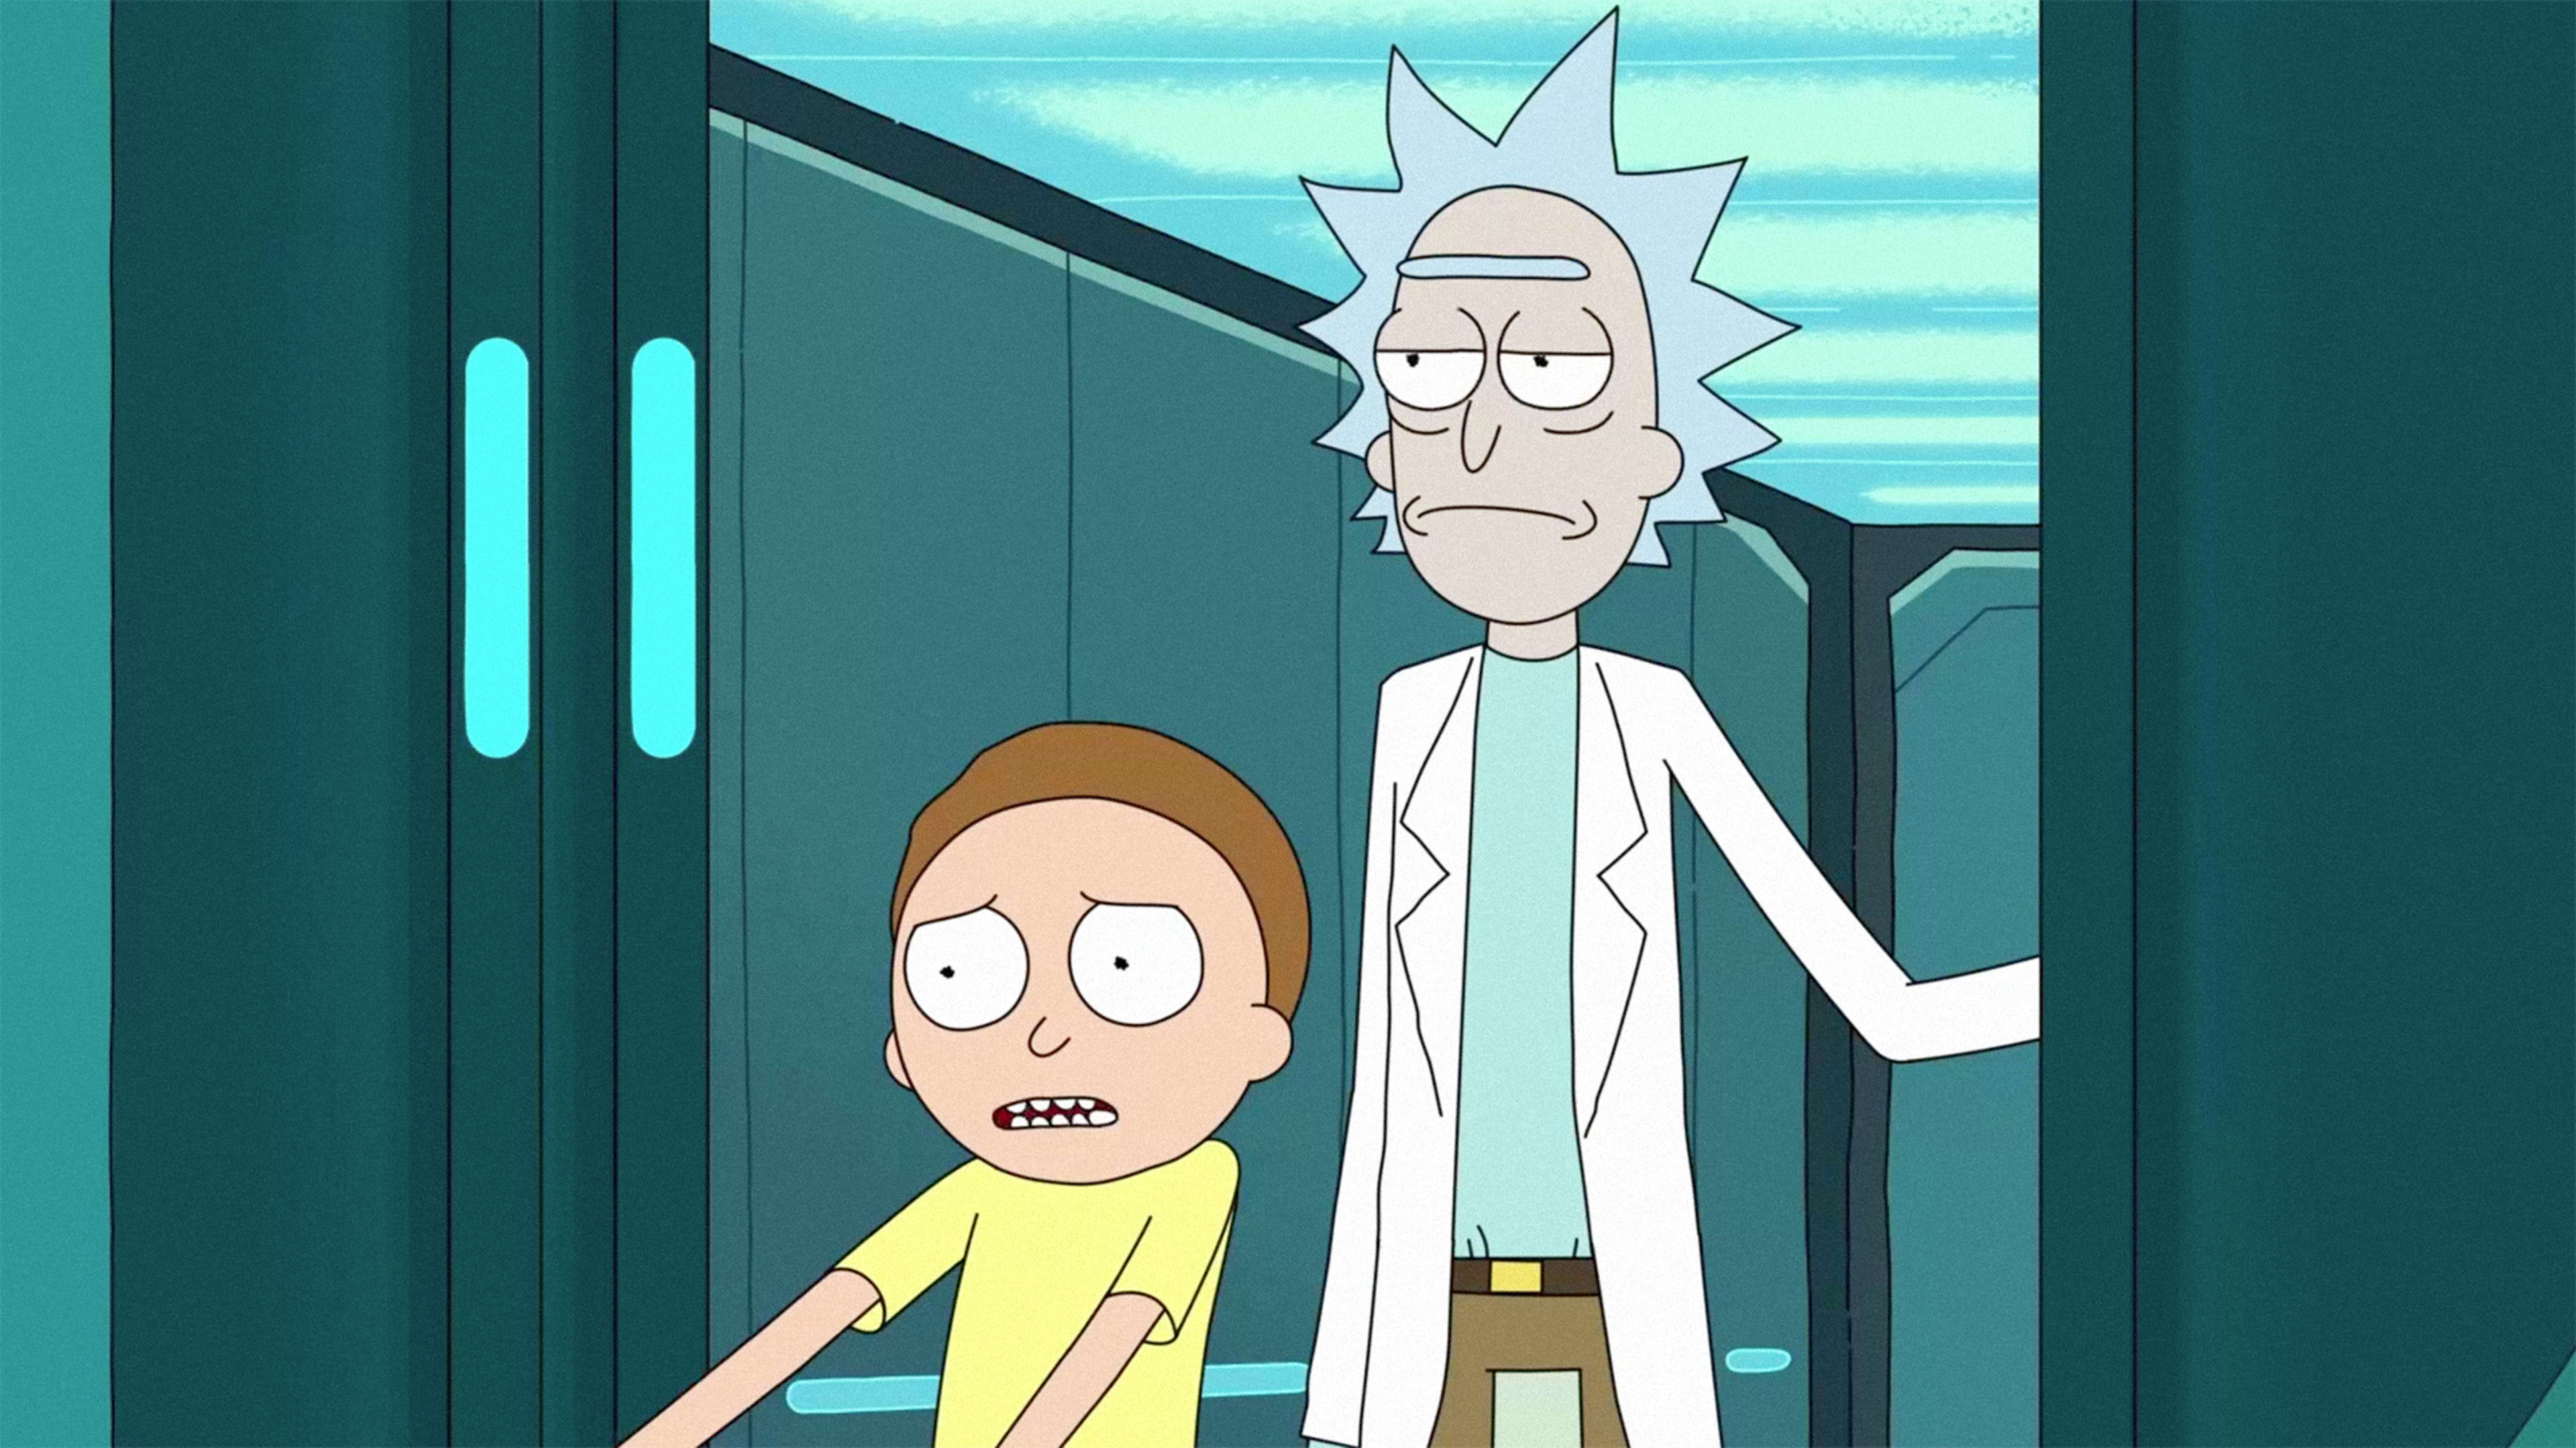 Dan Harmon on Actively Aiming for Re-Watchability with “Rick and Morty”